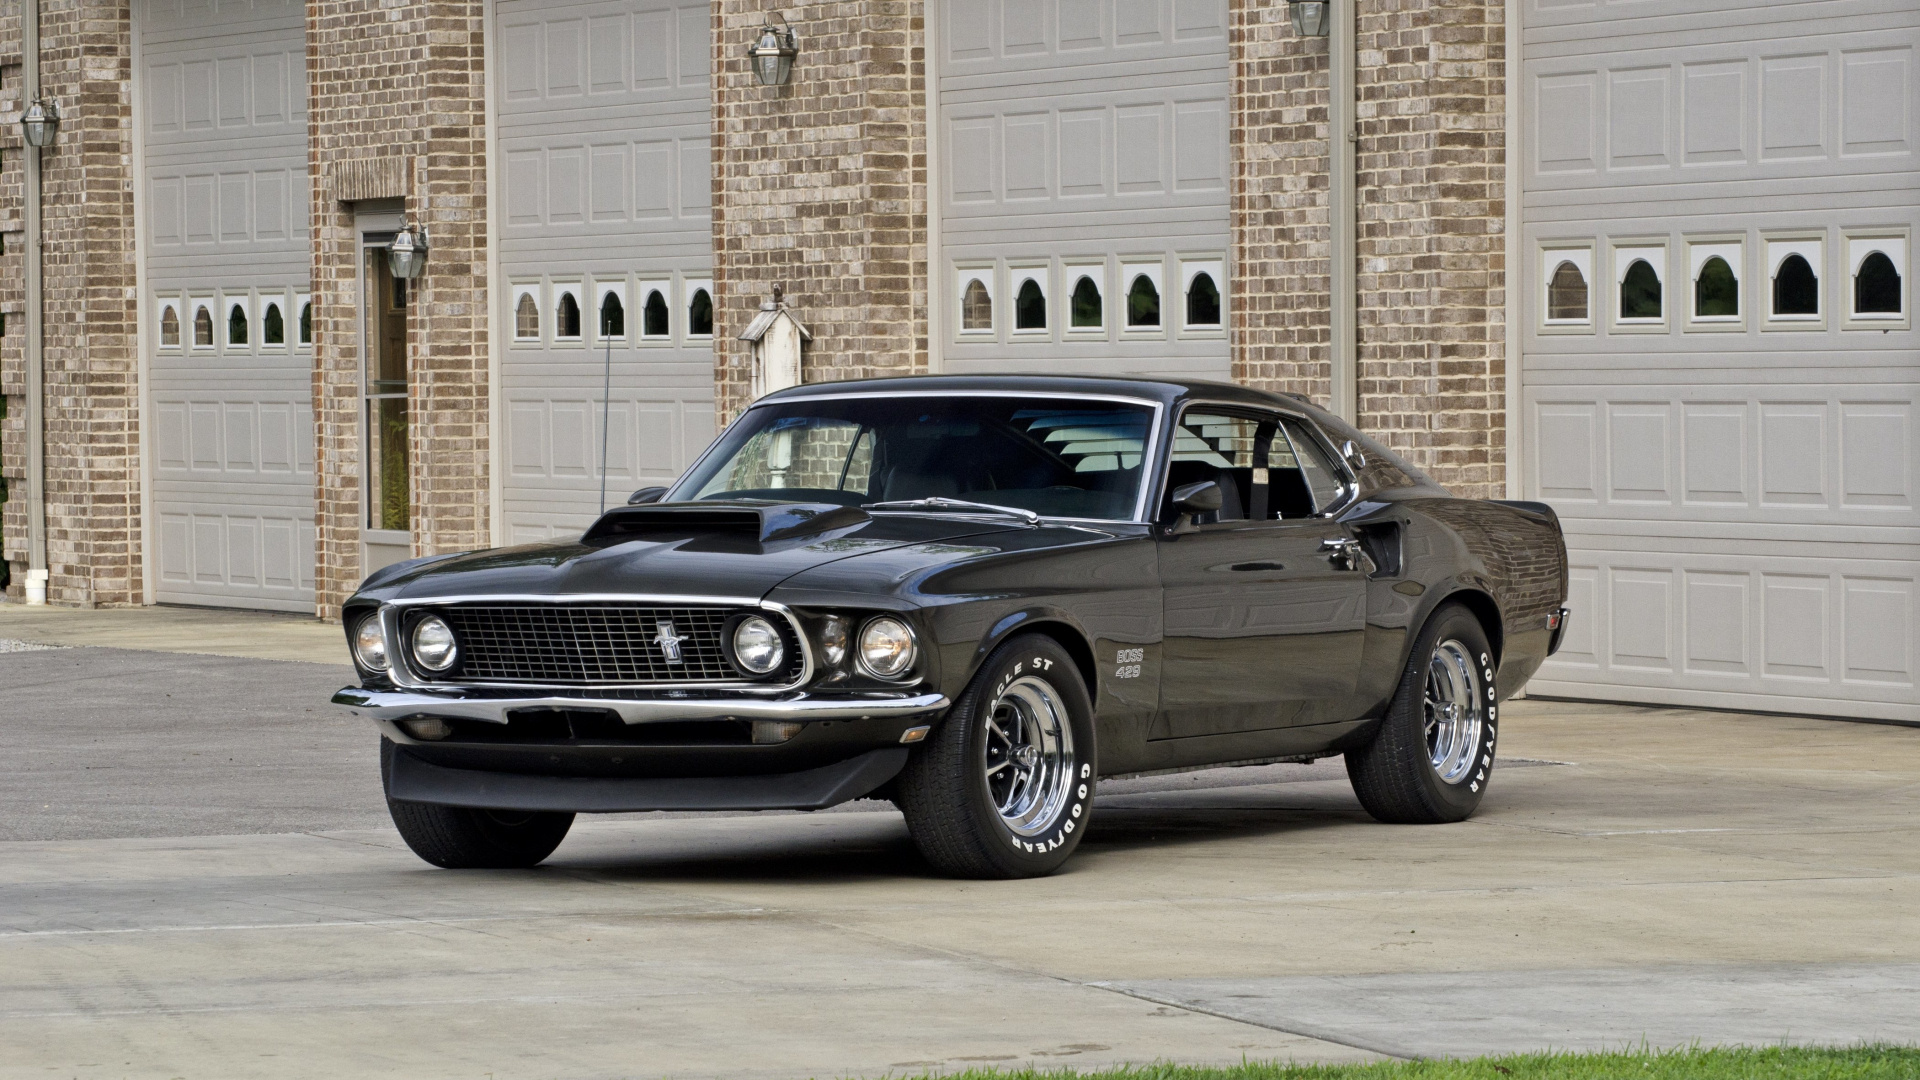 Hd Wallpapers 1080p Cars Mustang 1920x1080